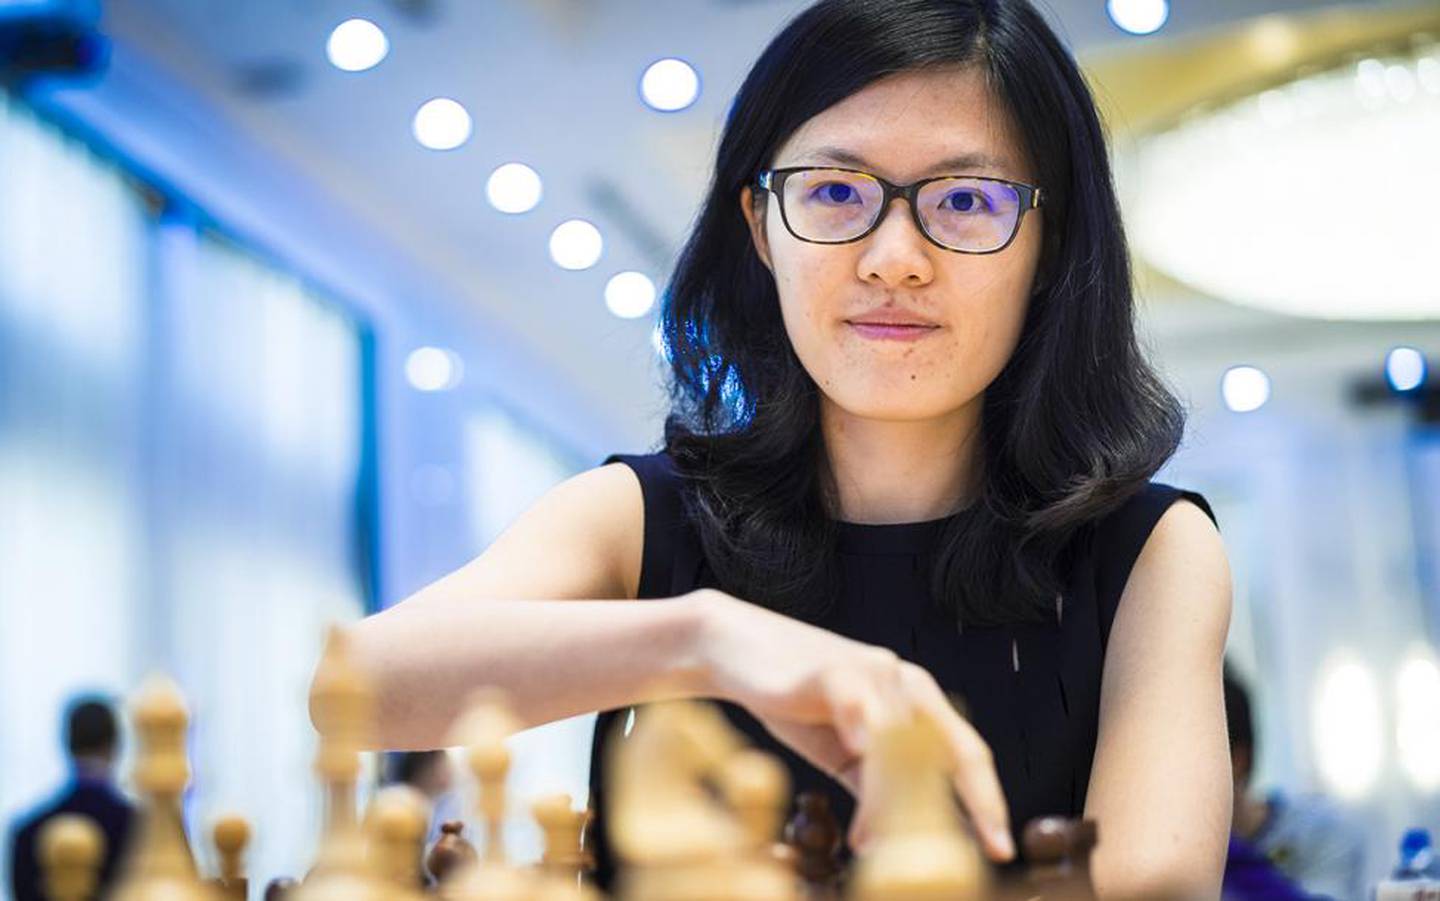 Yifan Hou, a Chinese chess player, is one of the few female grandmasters and is the only woman in the world’s top 100 chess players. Photo: University of Oxford